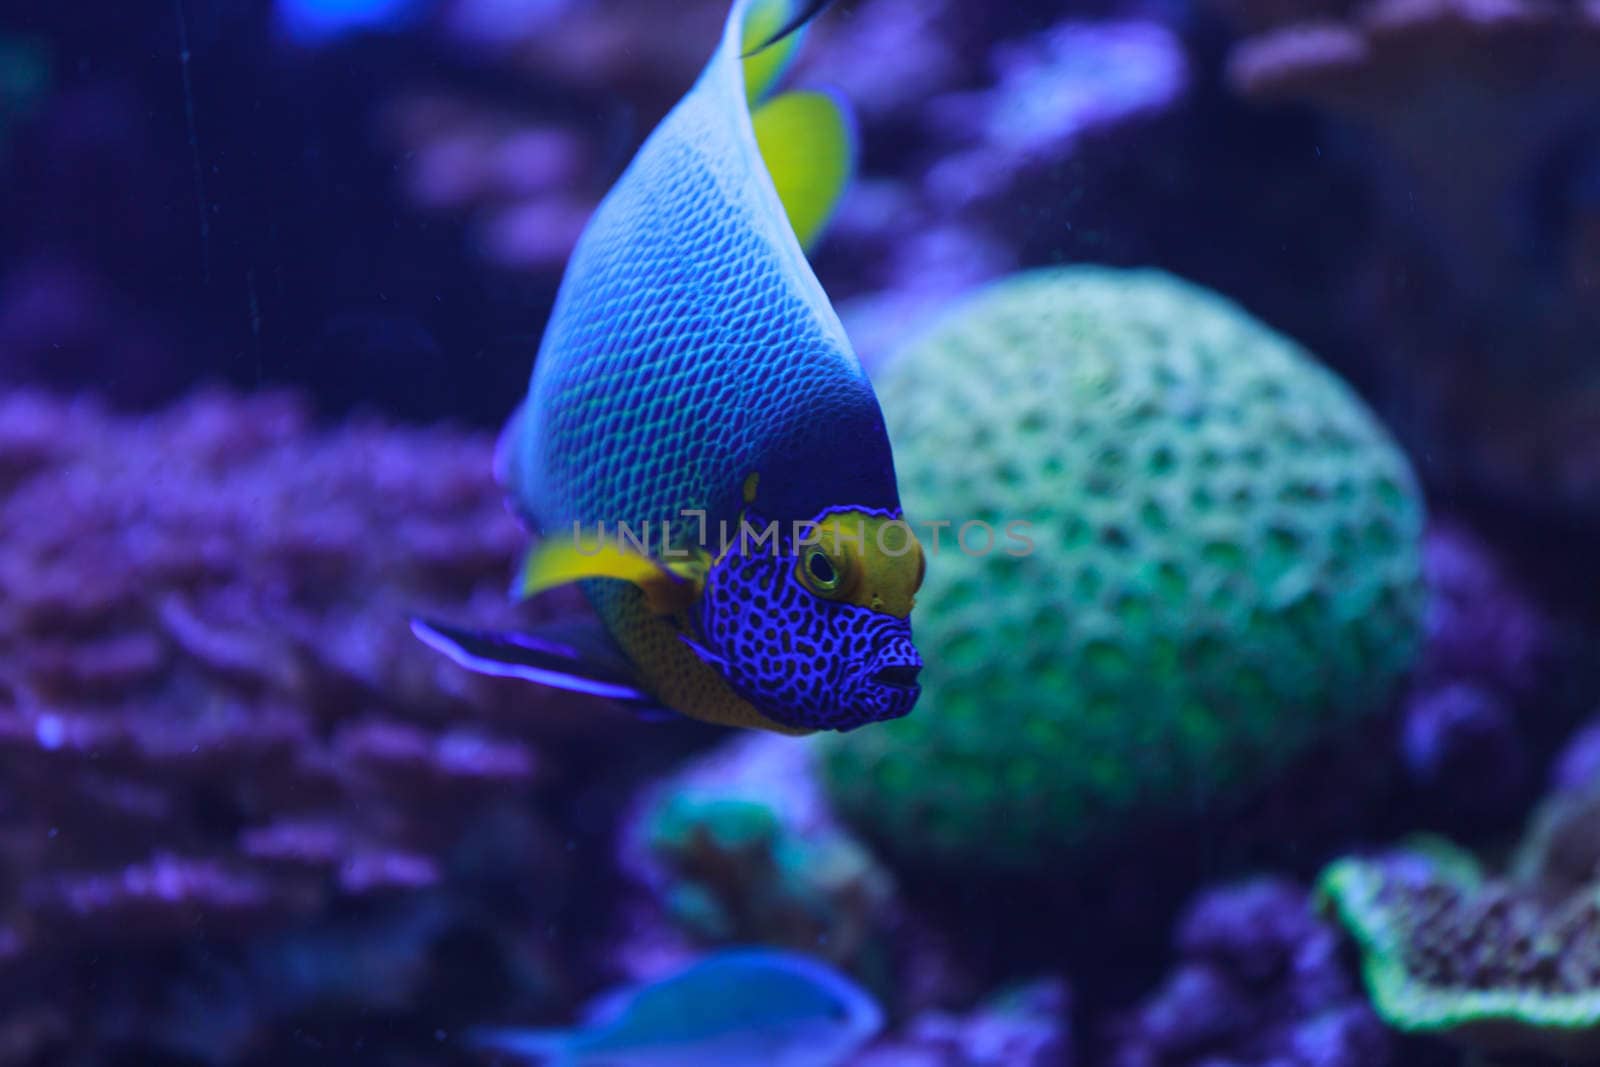 Bluefaced angelfish, Pomacanthus xanthometopon, can be found along the tropical reef in the ocean.